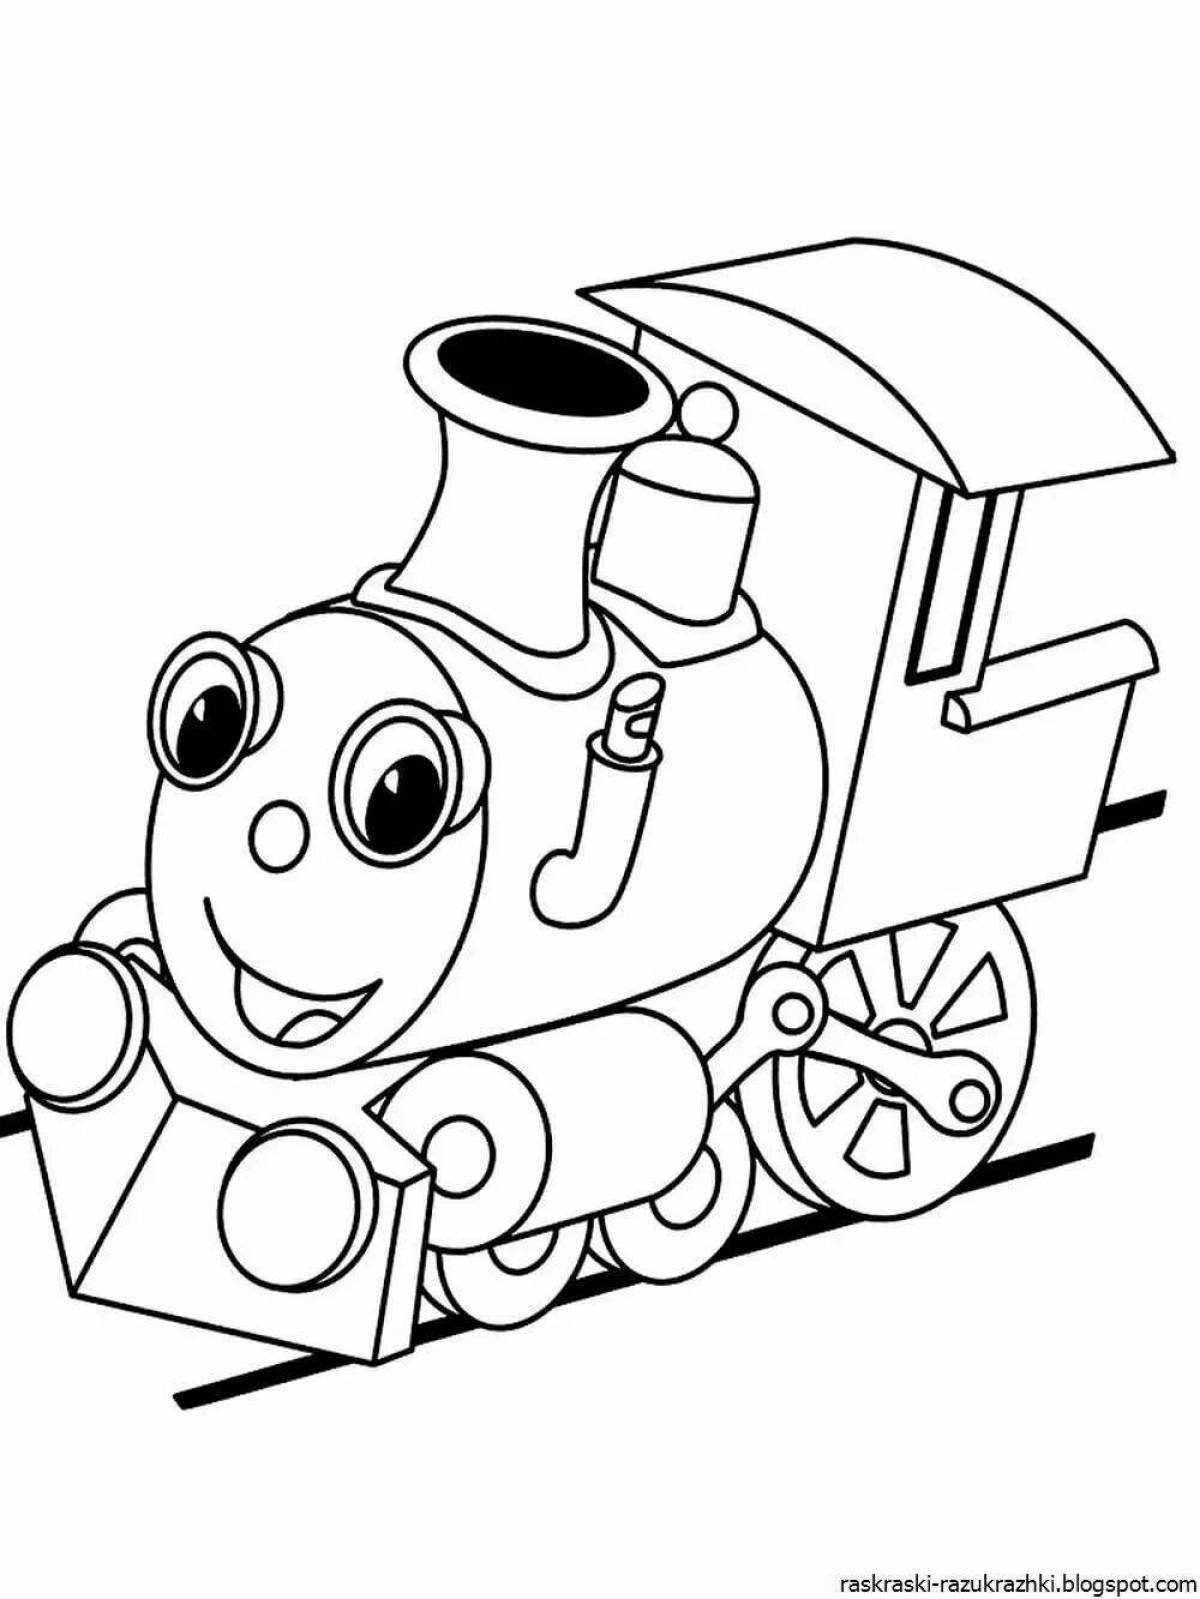 Colorful steam locomotive coloring page for kids